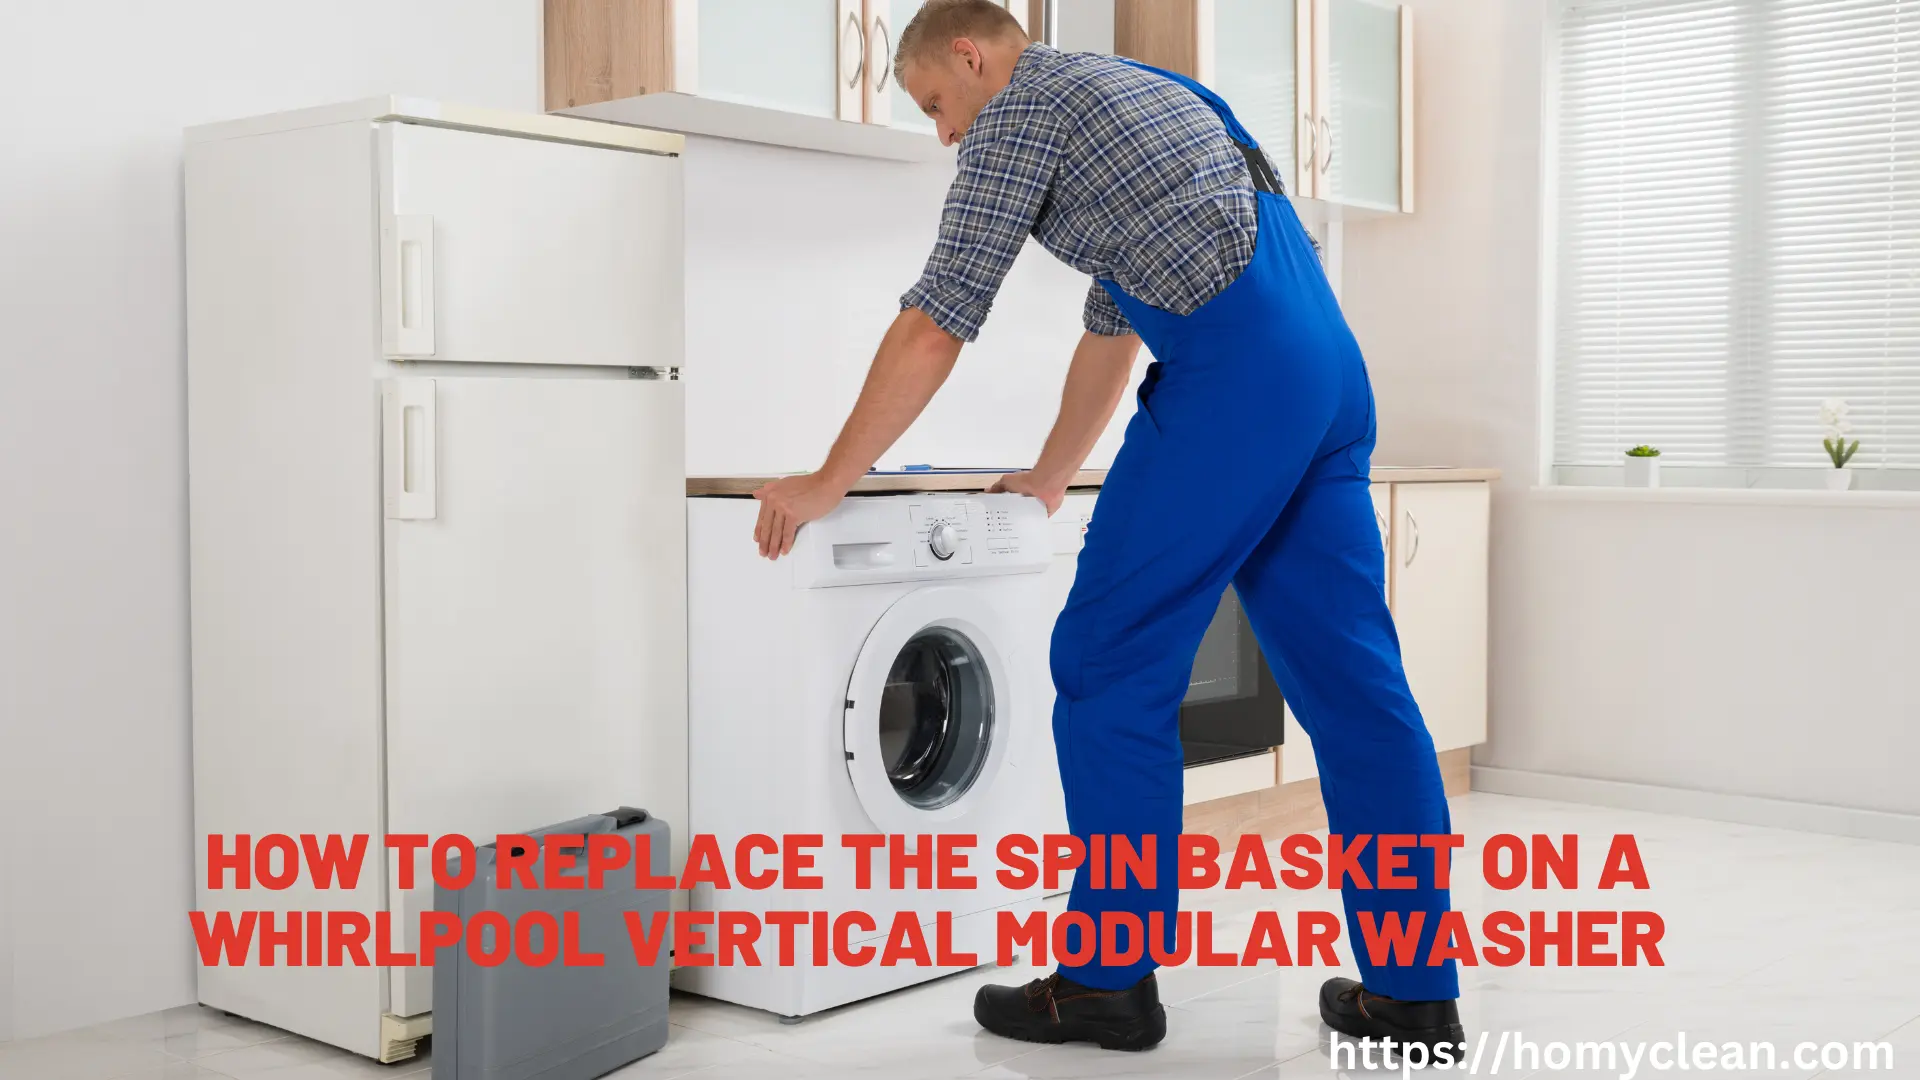 How to Replace the Spin Basket on a Whirlpool Vertical Modular Washer